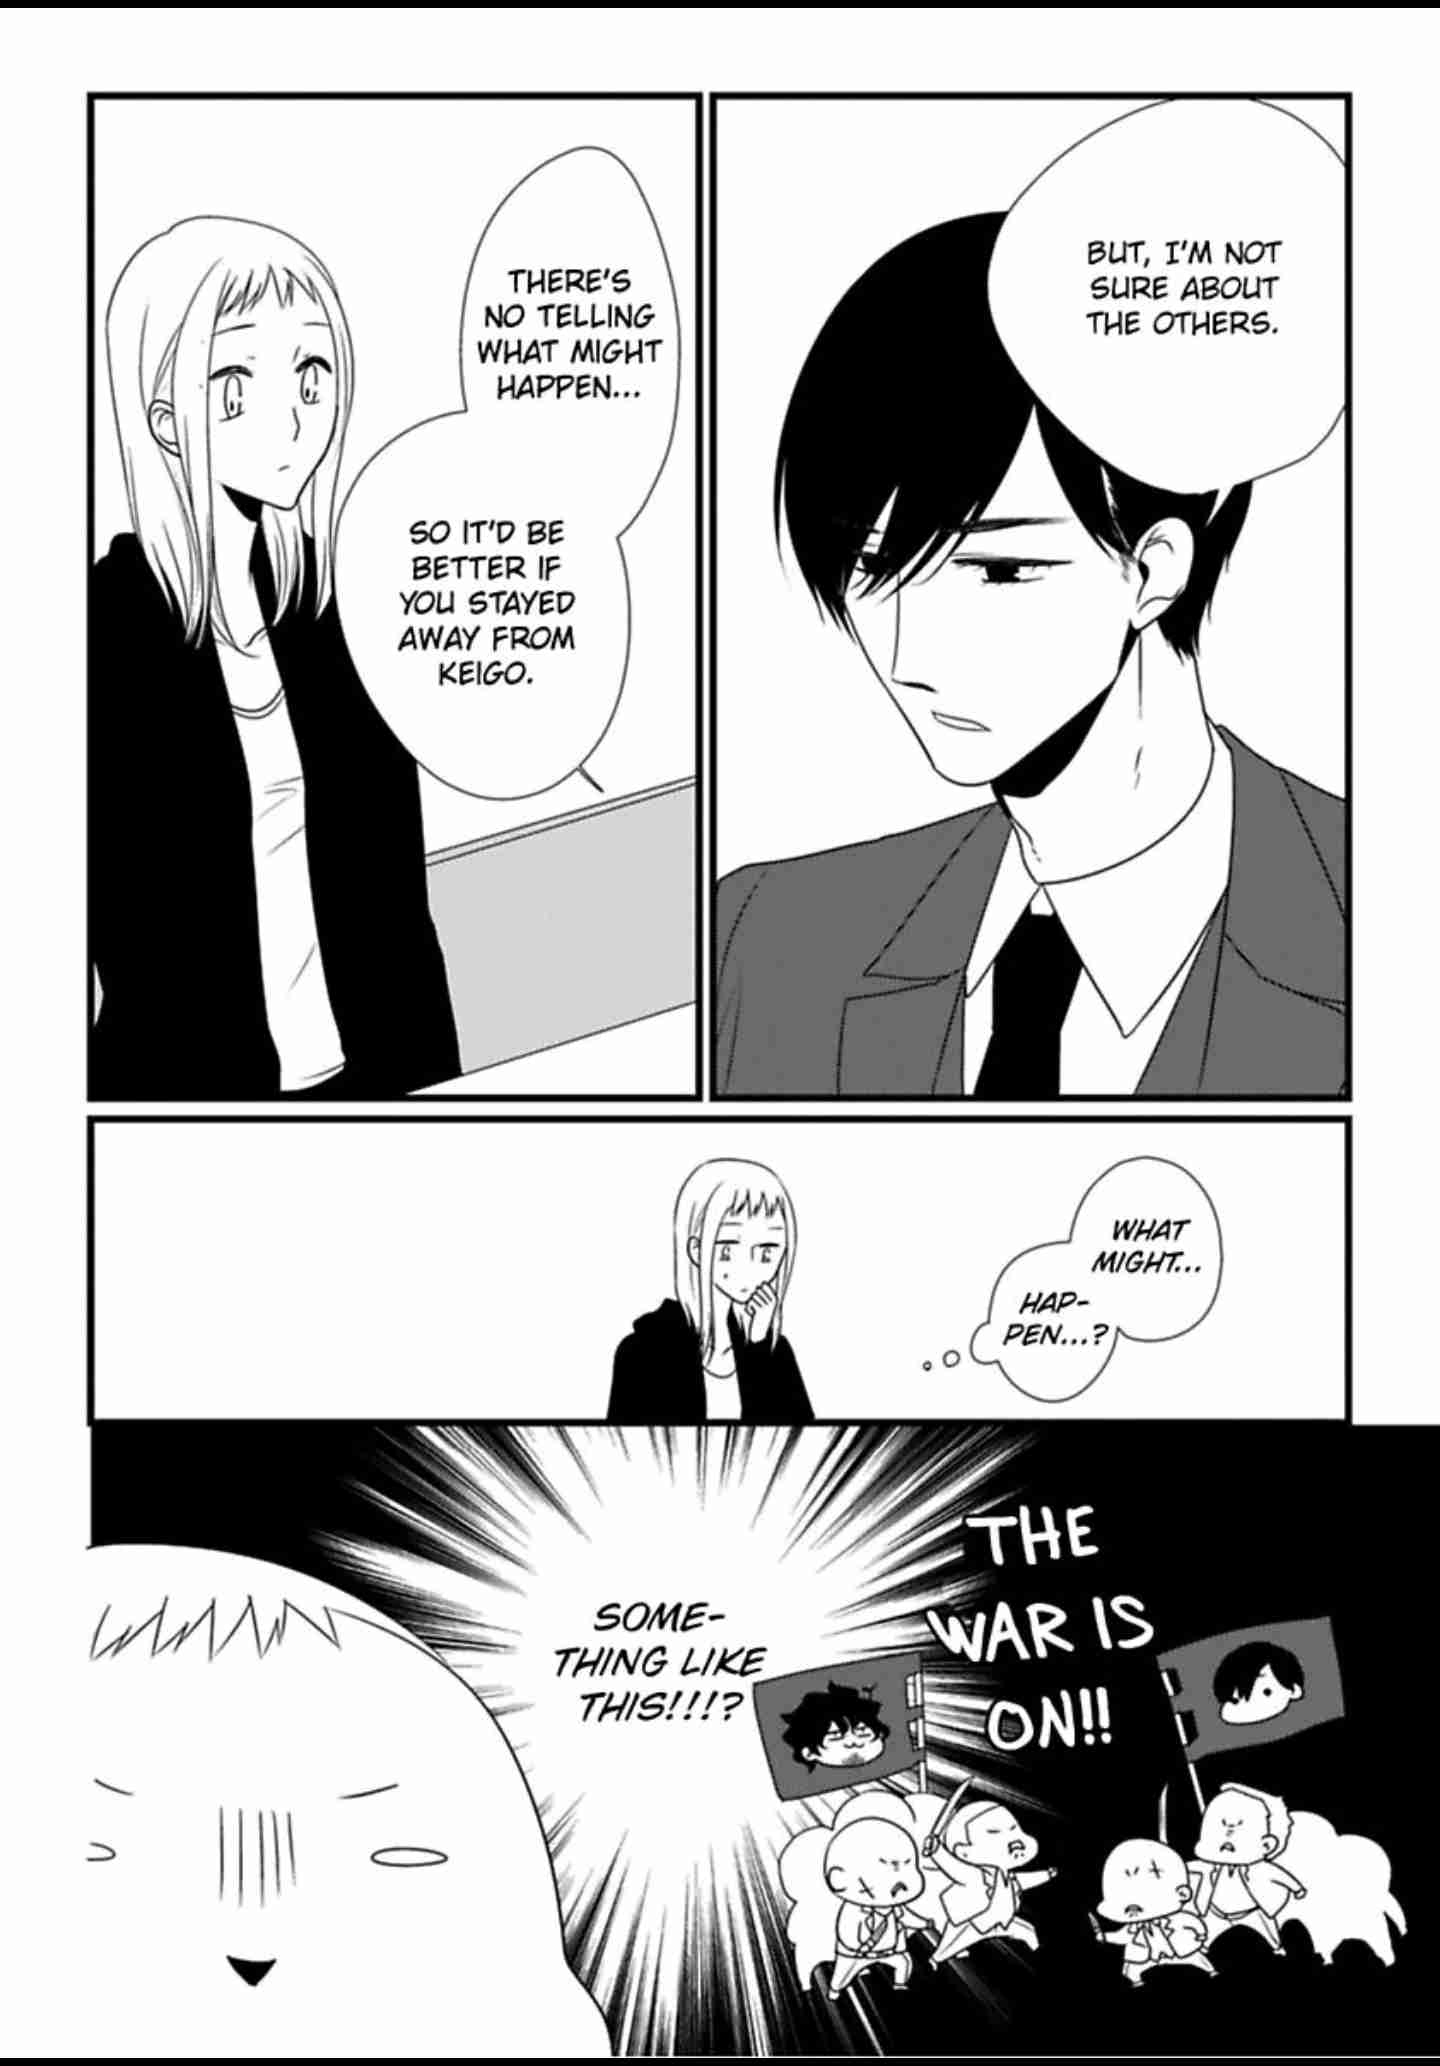 The Artist and the Beast Ch.19